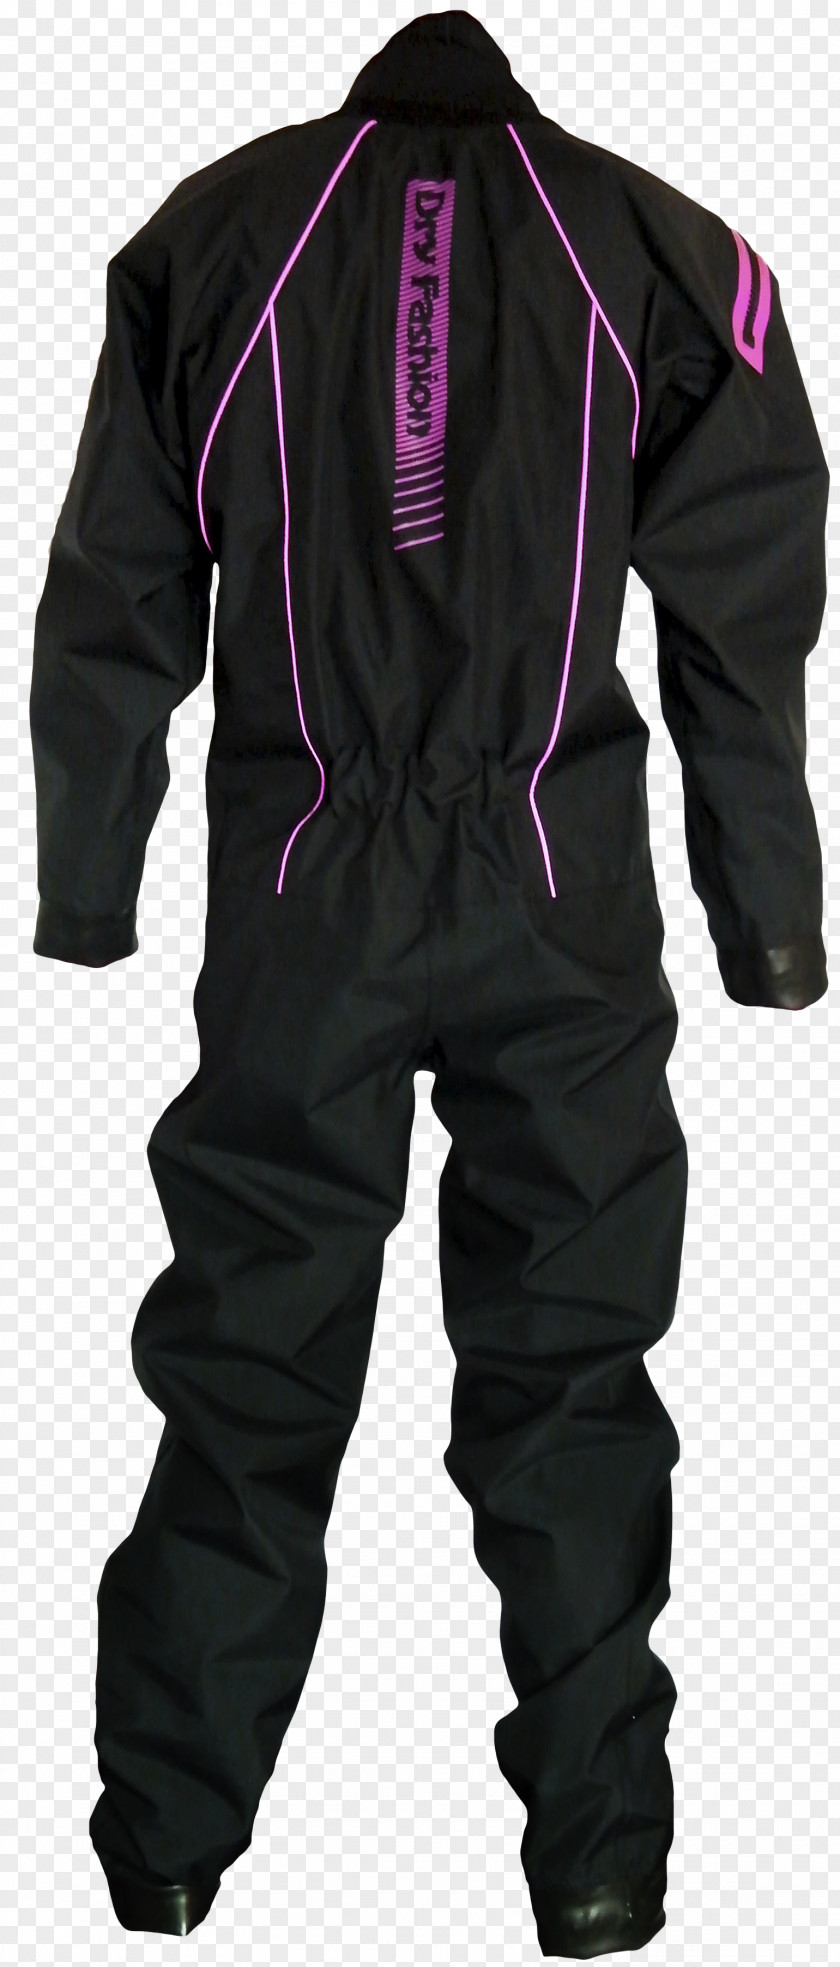 Dry Suit Standup Paddleboarding Paddling Wetsuit I-SUP PNG